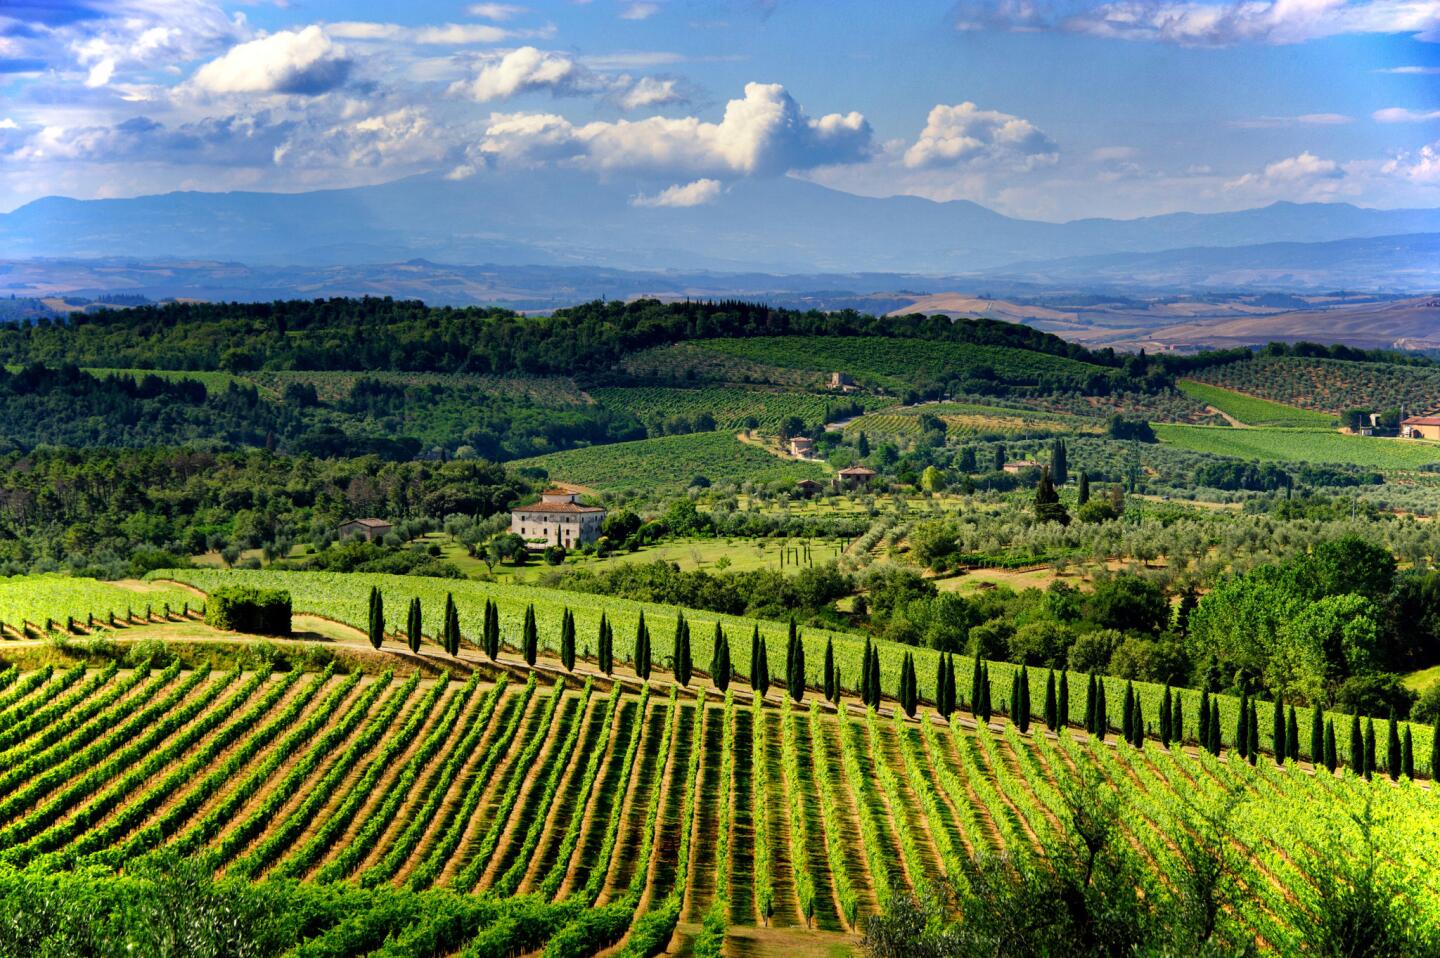 The rolling hills and verdant fields of Chianti are a sight to behold from any vantage point, but by motorcycle the countryside becomes a landscape of the senses.